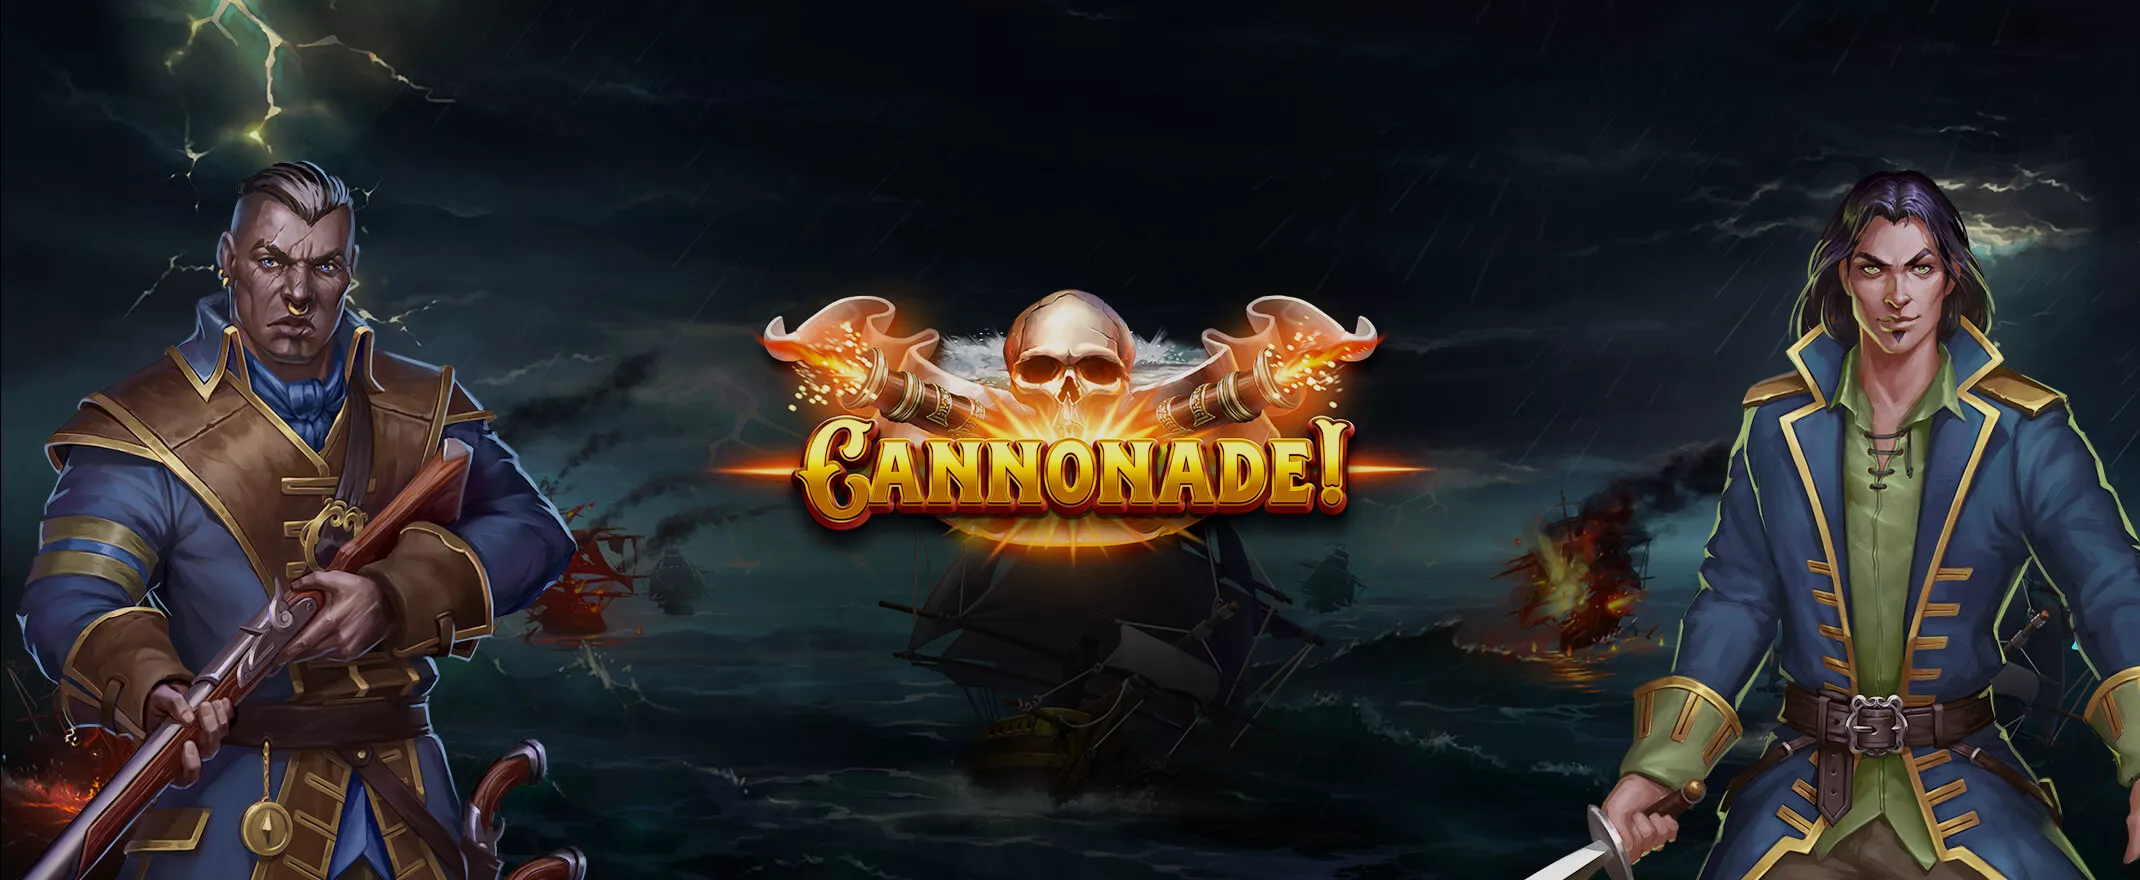 Get Set For A Pirate Adventure In Cannonade!